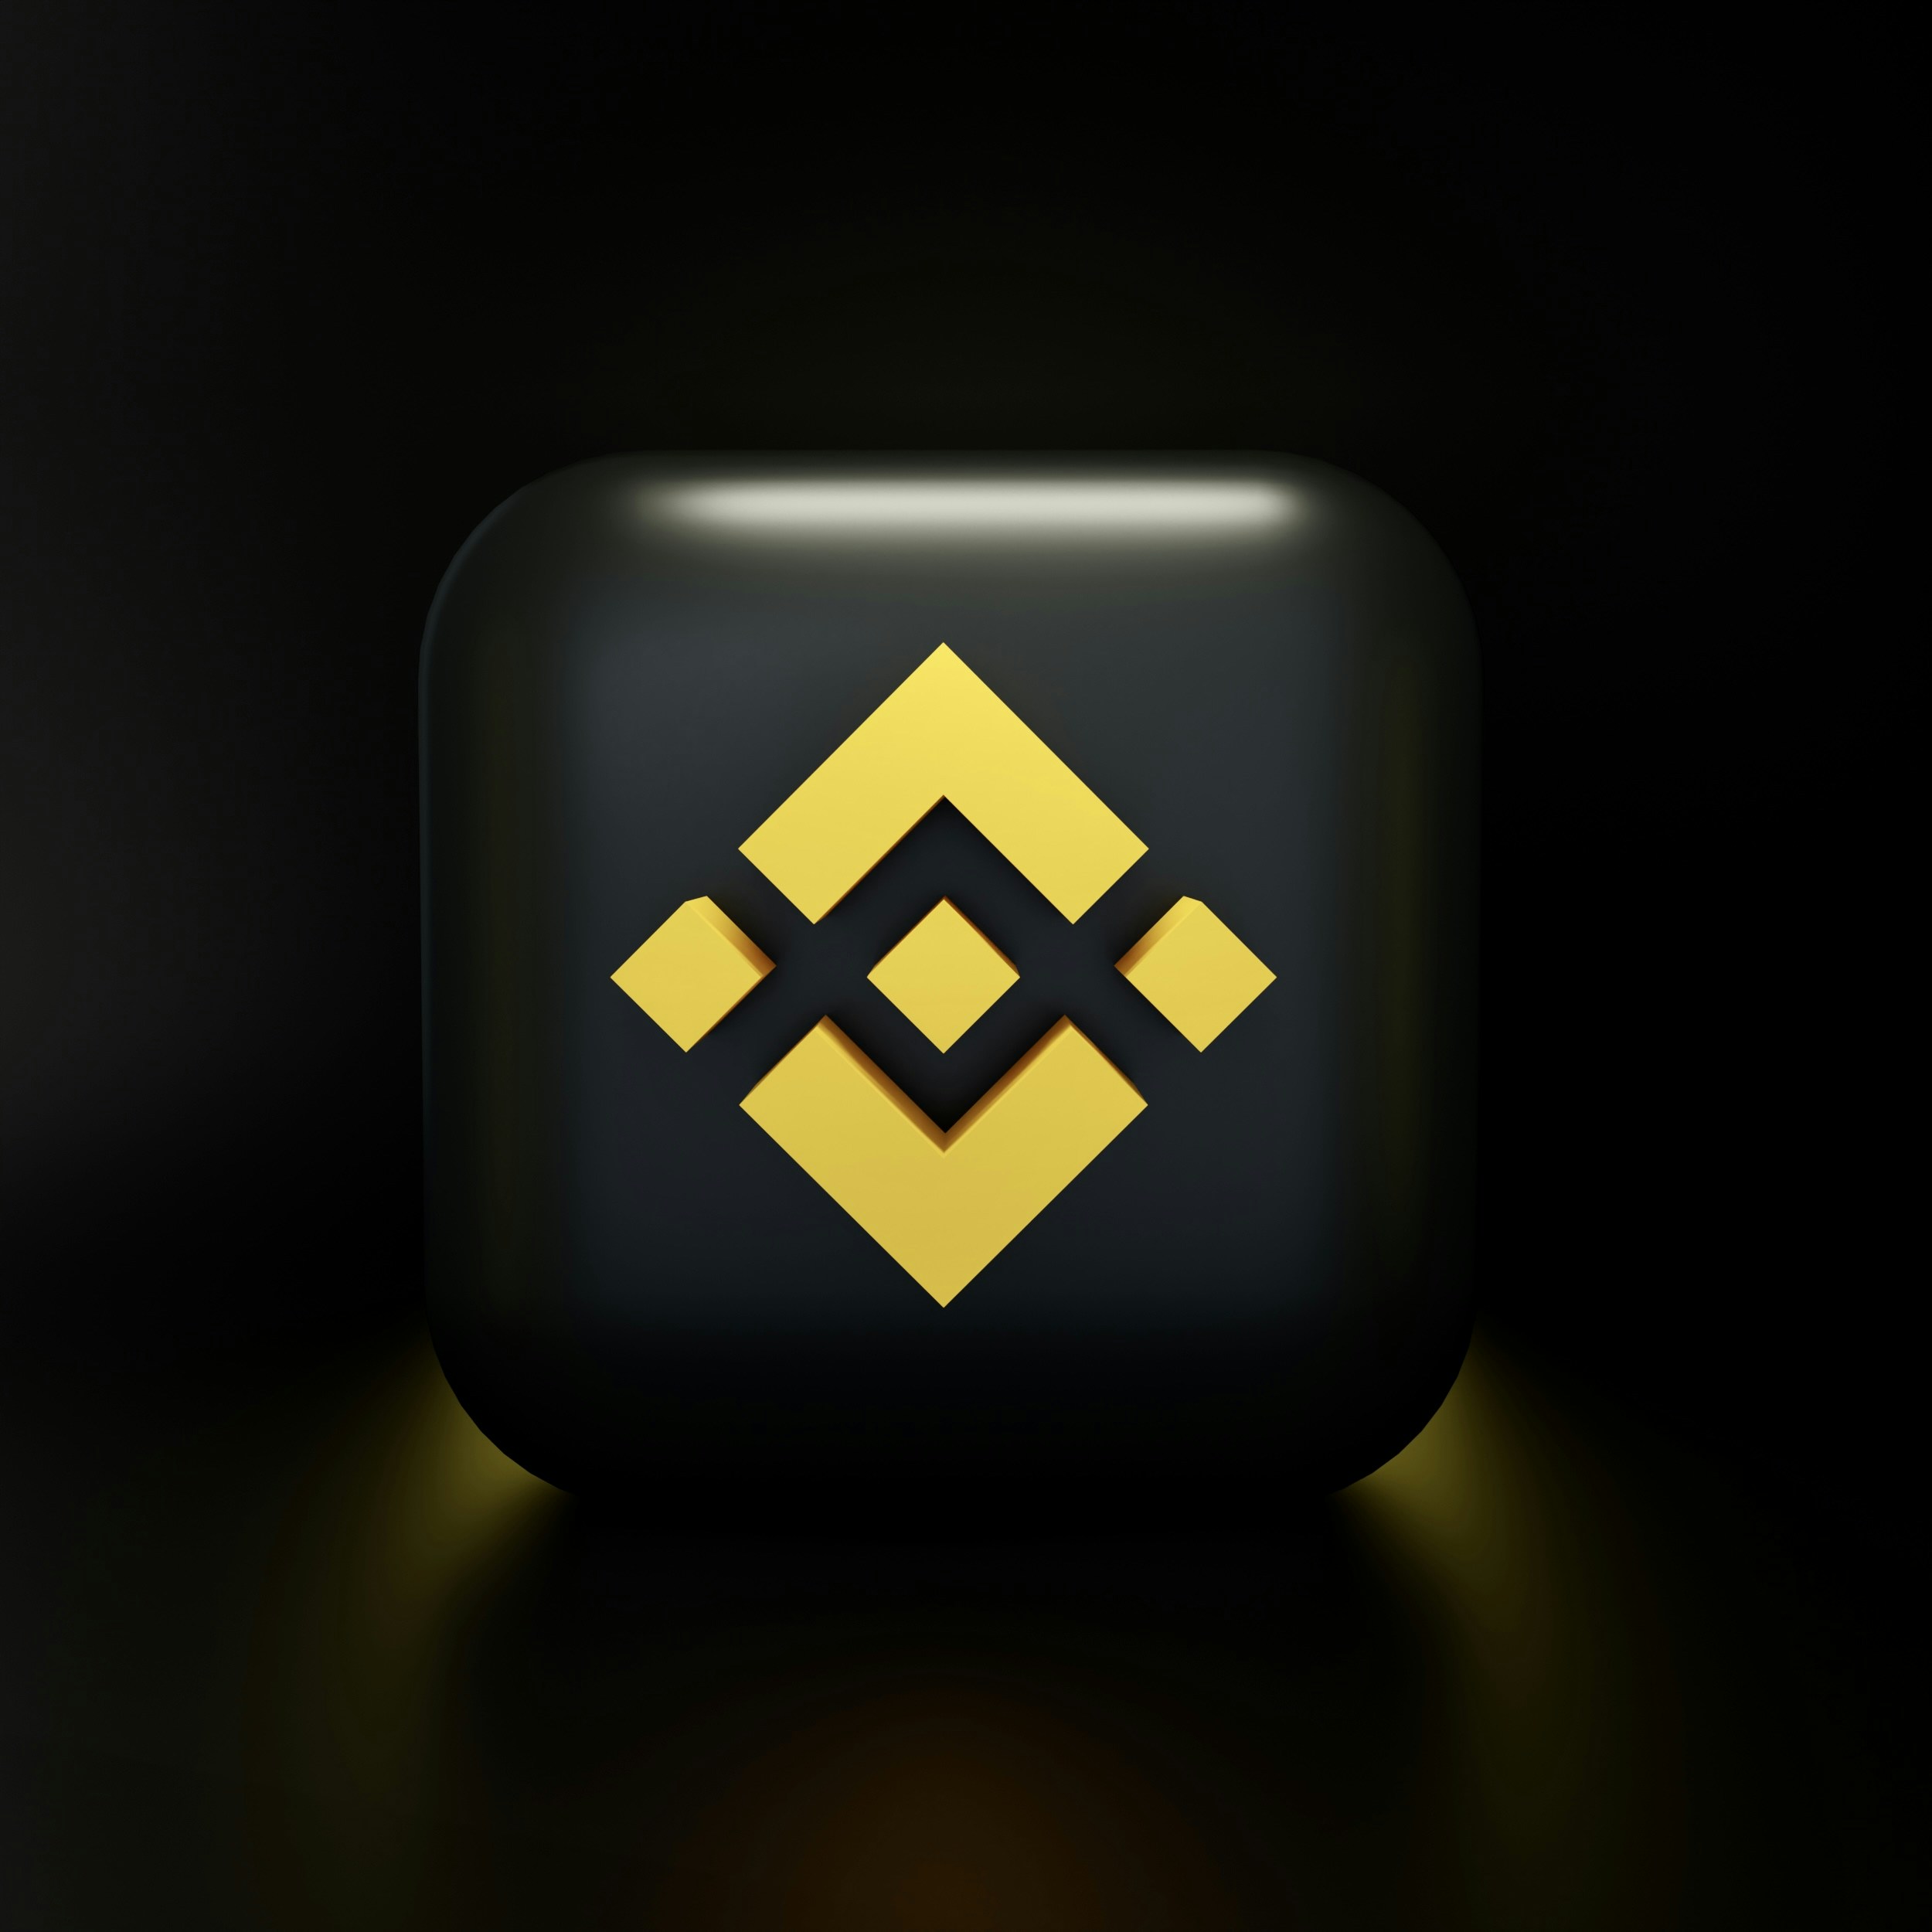 Binance BNB 3D icon illustration. Download this premium image🔝 ⠀ 📩 Feel free to contact me by email: mariiashalabaieva@gmail.com ⠀ 📷 Make sure to follow me on Instagram for updates: www.instagram.com/shalabaievaa